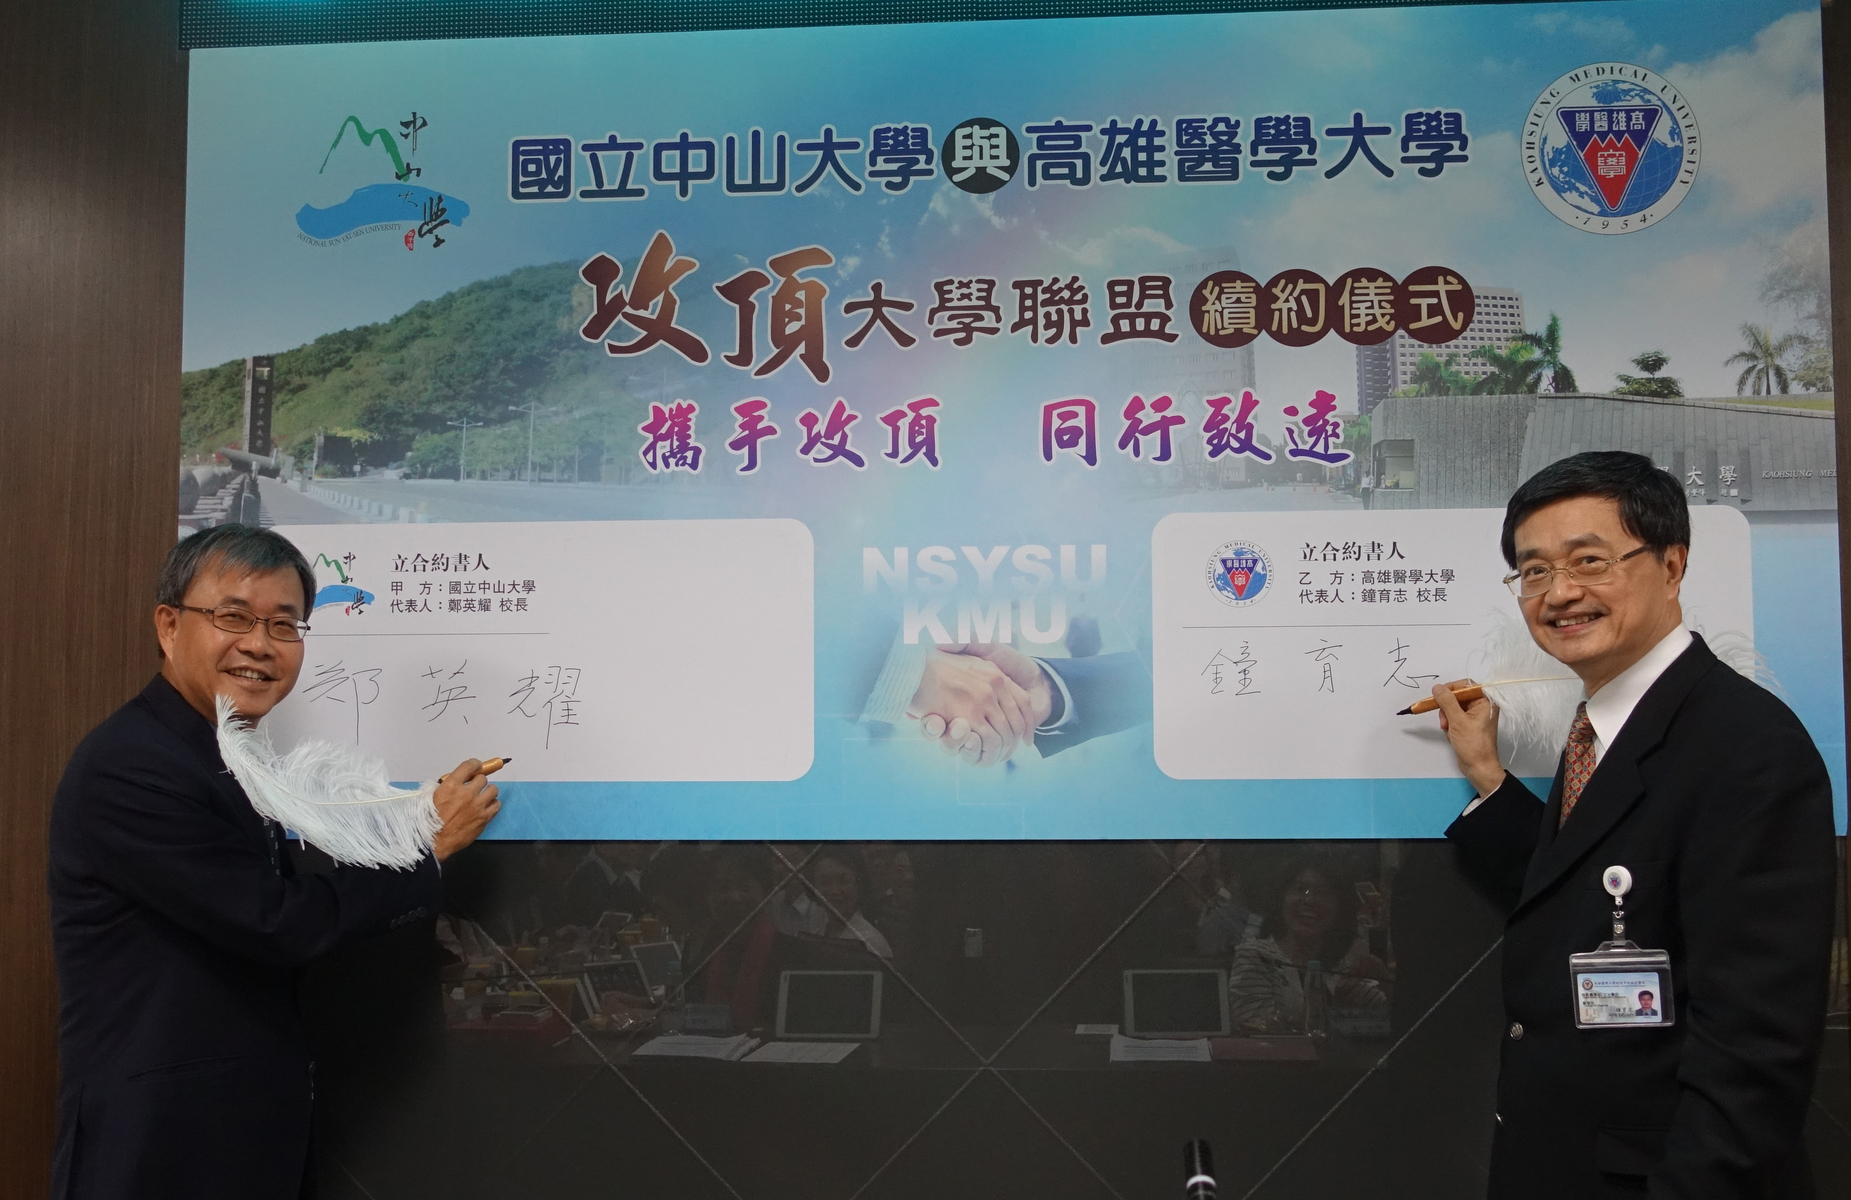 The Aim-for-the-Top Alliance between National Sun Yat-sen University (NSYSU) and Kaohsiung Medical University (KMU) is entering its 10th year! Both universities complement each other and benefit from the collaboration, which has brought excellent results.